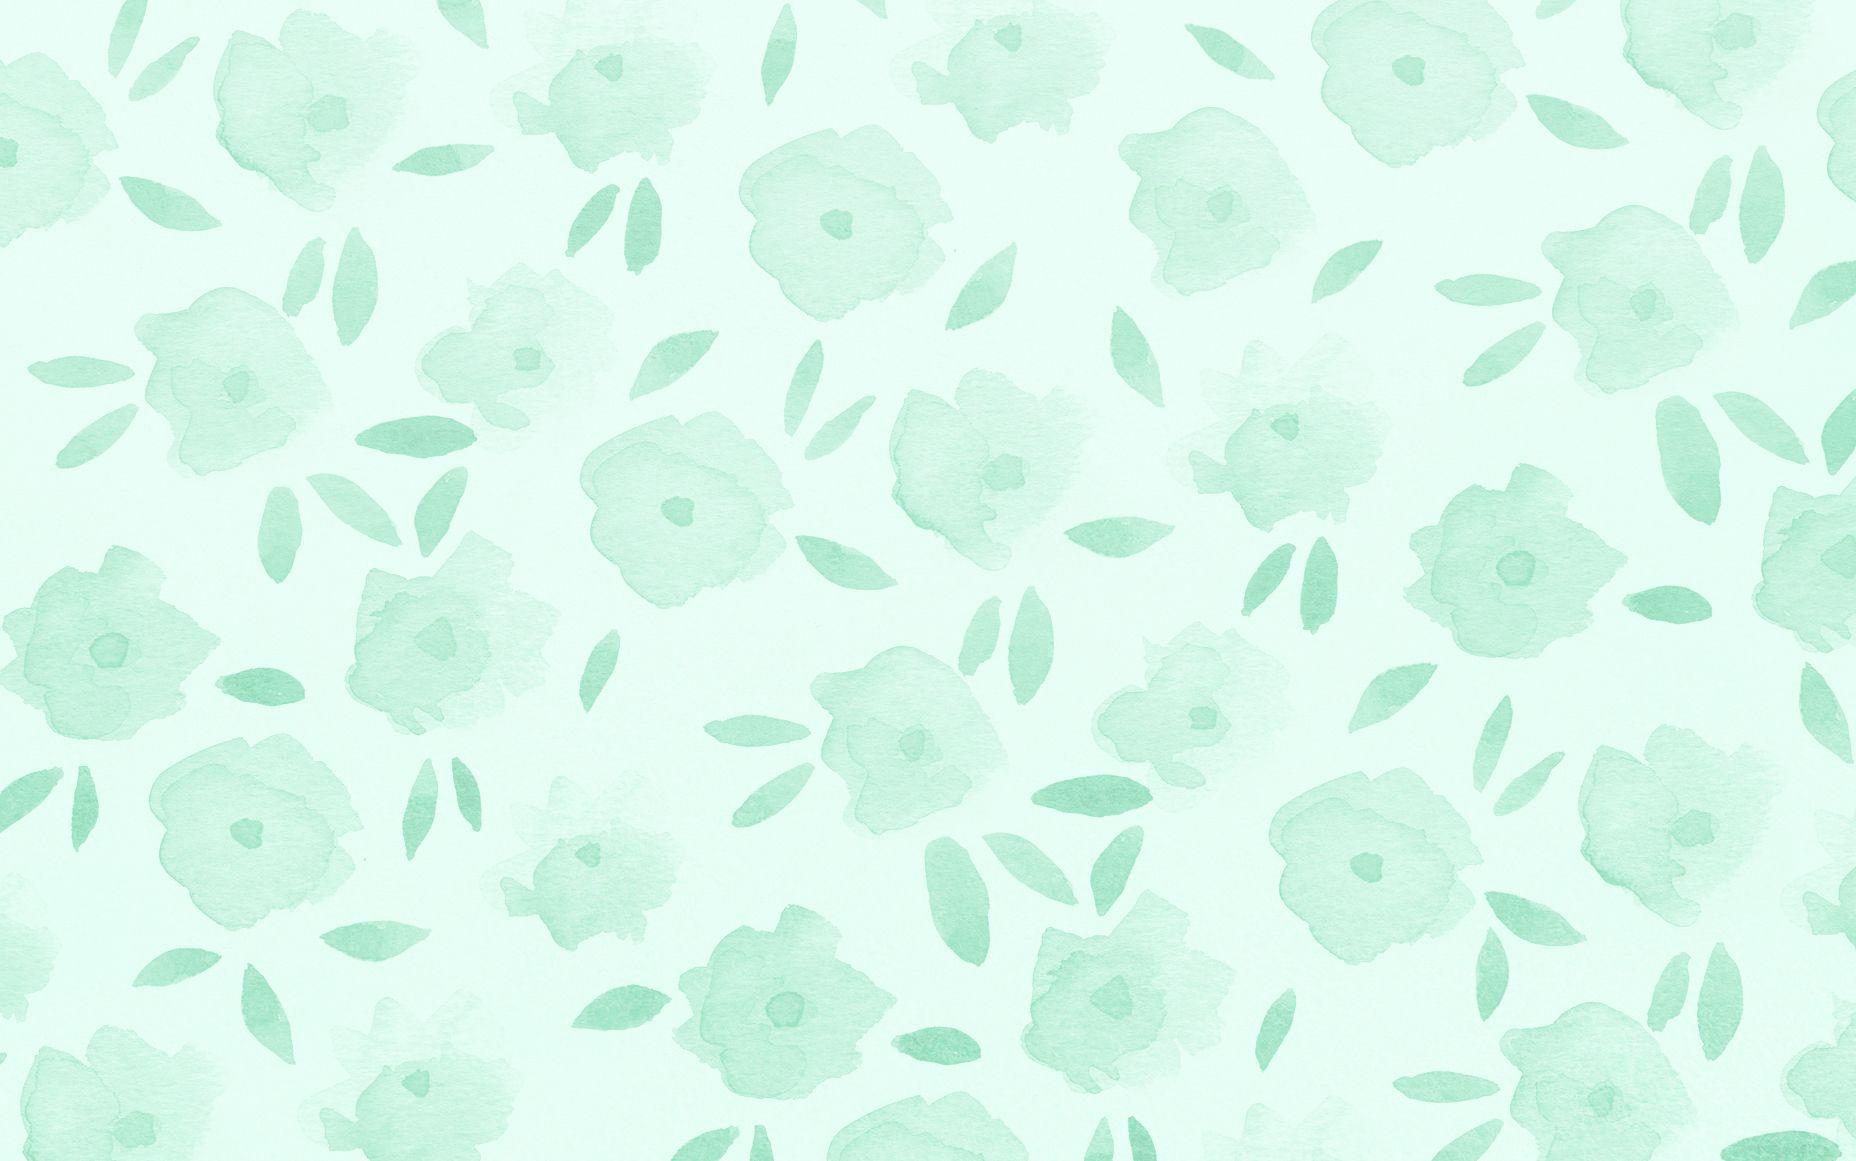 Wallpapers : Cute Mint Green Wallpapers Download At Designs